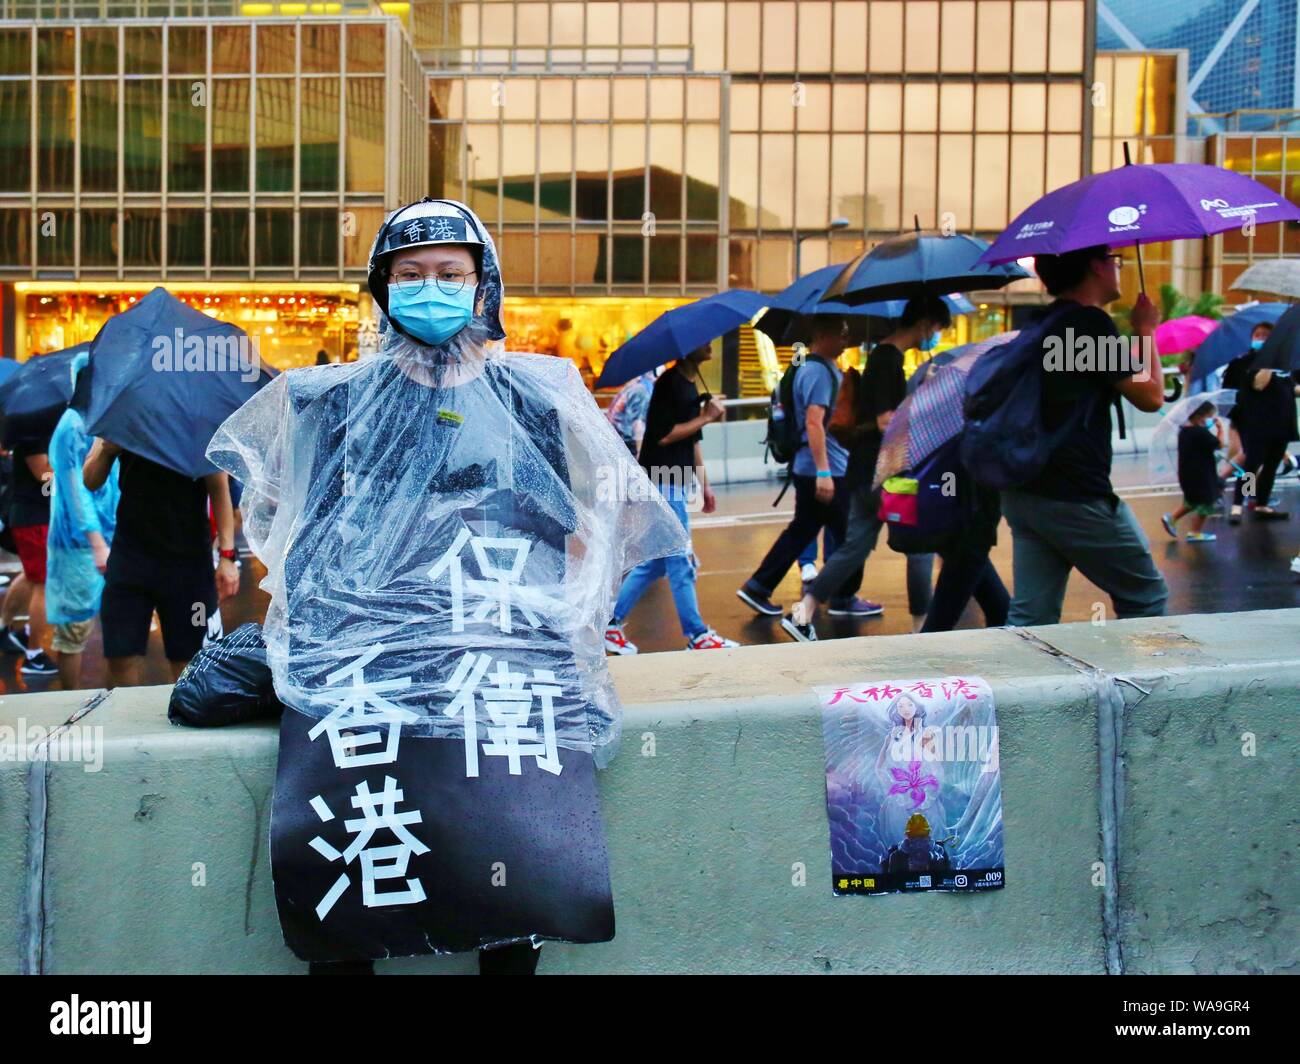 Hong Kong, China. 18th Aug, 2019. Organisers say 1.7 million people attend a pro-democracy protest in Hong Kong. It makes it the second largest peaceful march recorded in Hong Kong and after weeks with violent clashes this weekend's protest remained peaceful. Credit: Gonzales Photo/Alamy Live News Stock Photo